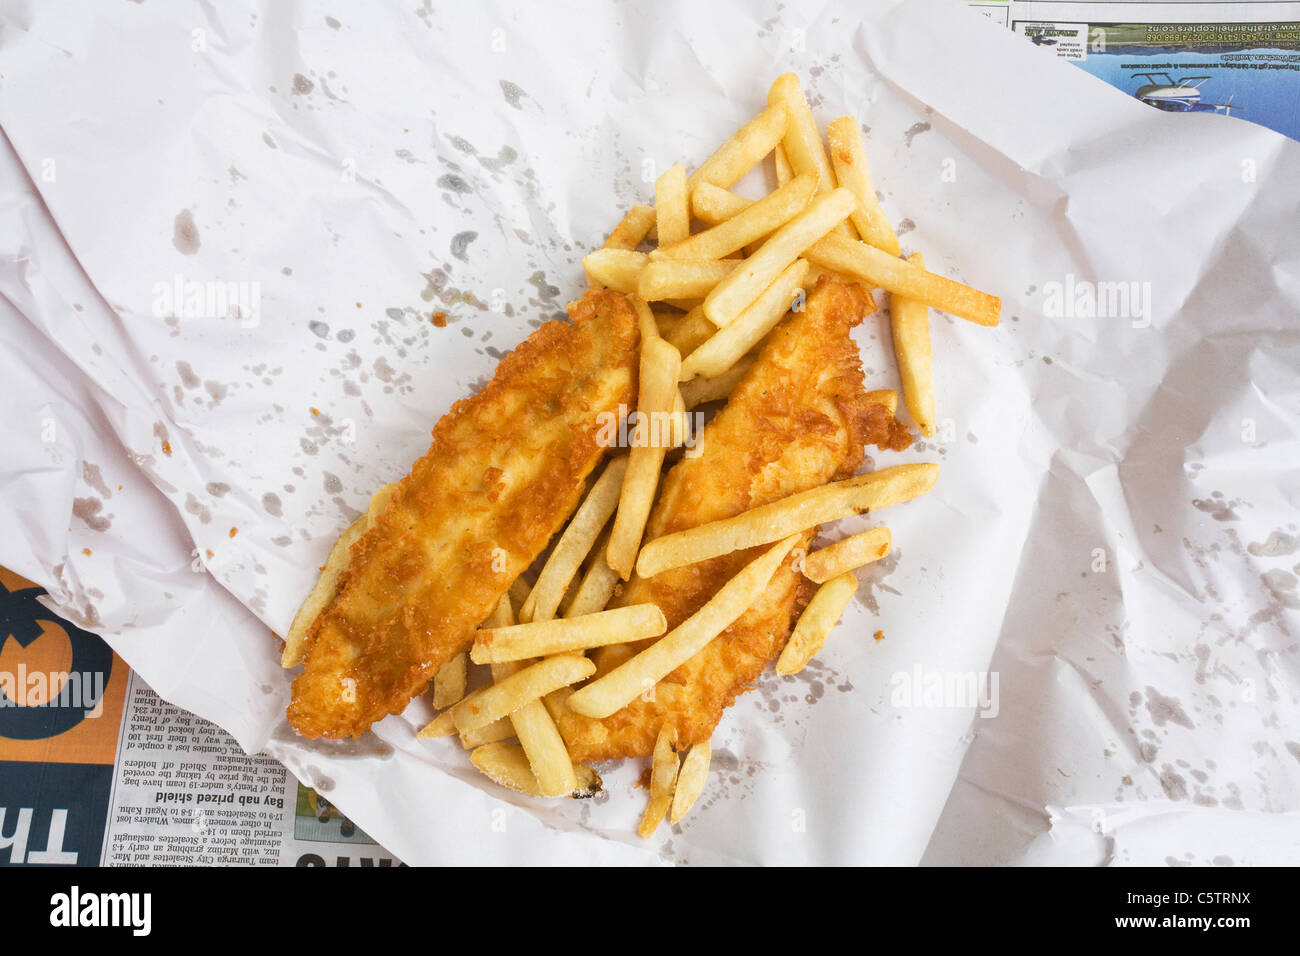 British fish and chips on paper, elevated view Stock Photo